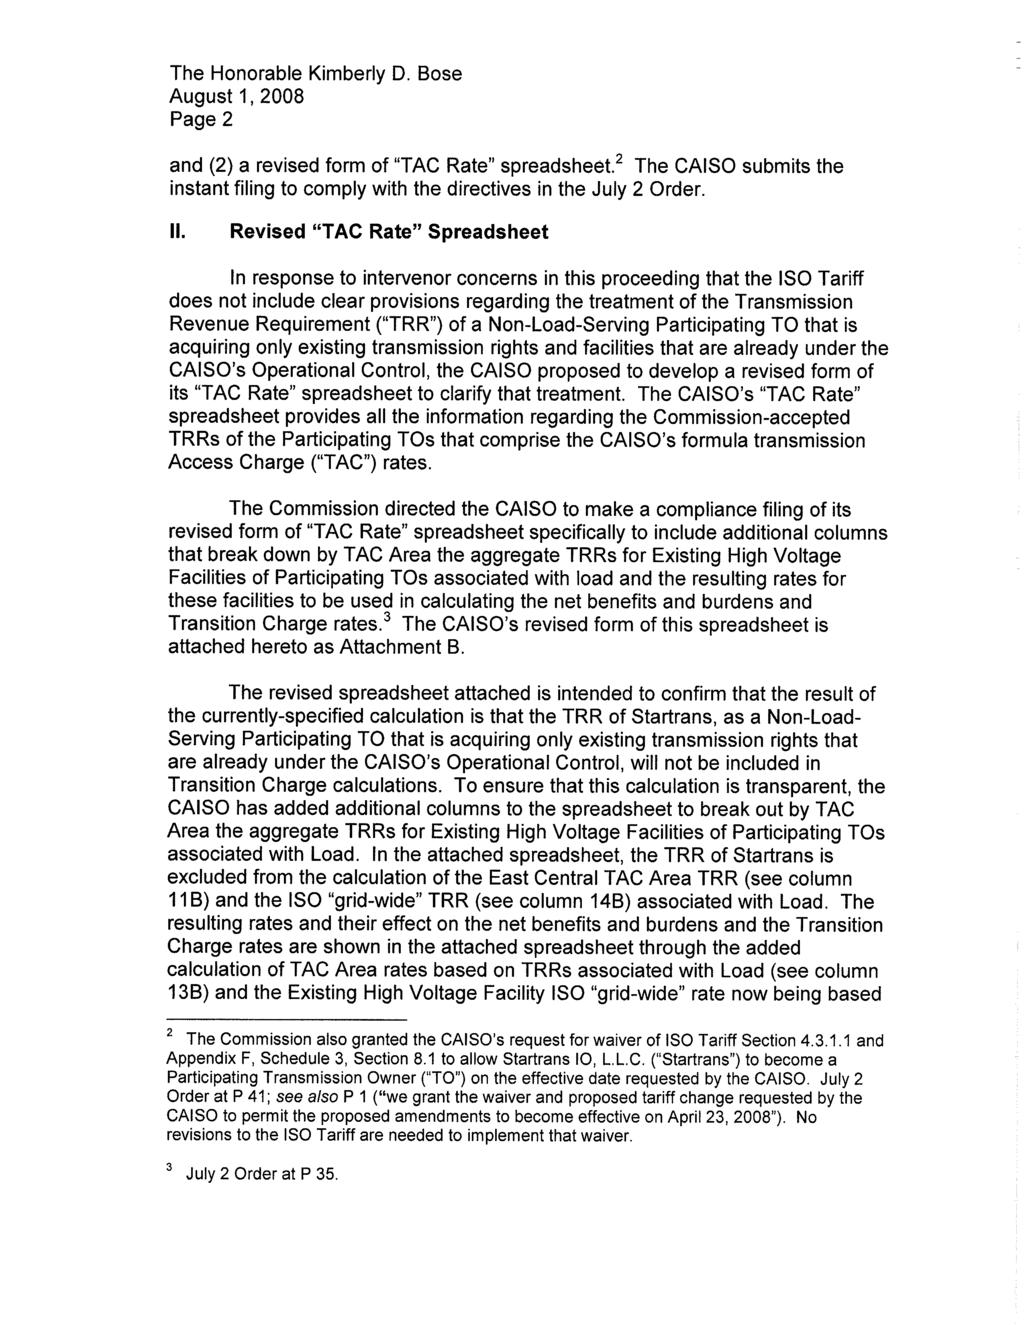 The Honorable Kimberly D. Bose August 1, 28 Page 2 and (2) a revised form of "TAC Rate" spreadsheet. 2 The CAISO submits the instant filing to comply with the directives in the July 2 Order. II.